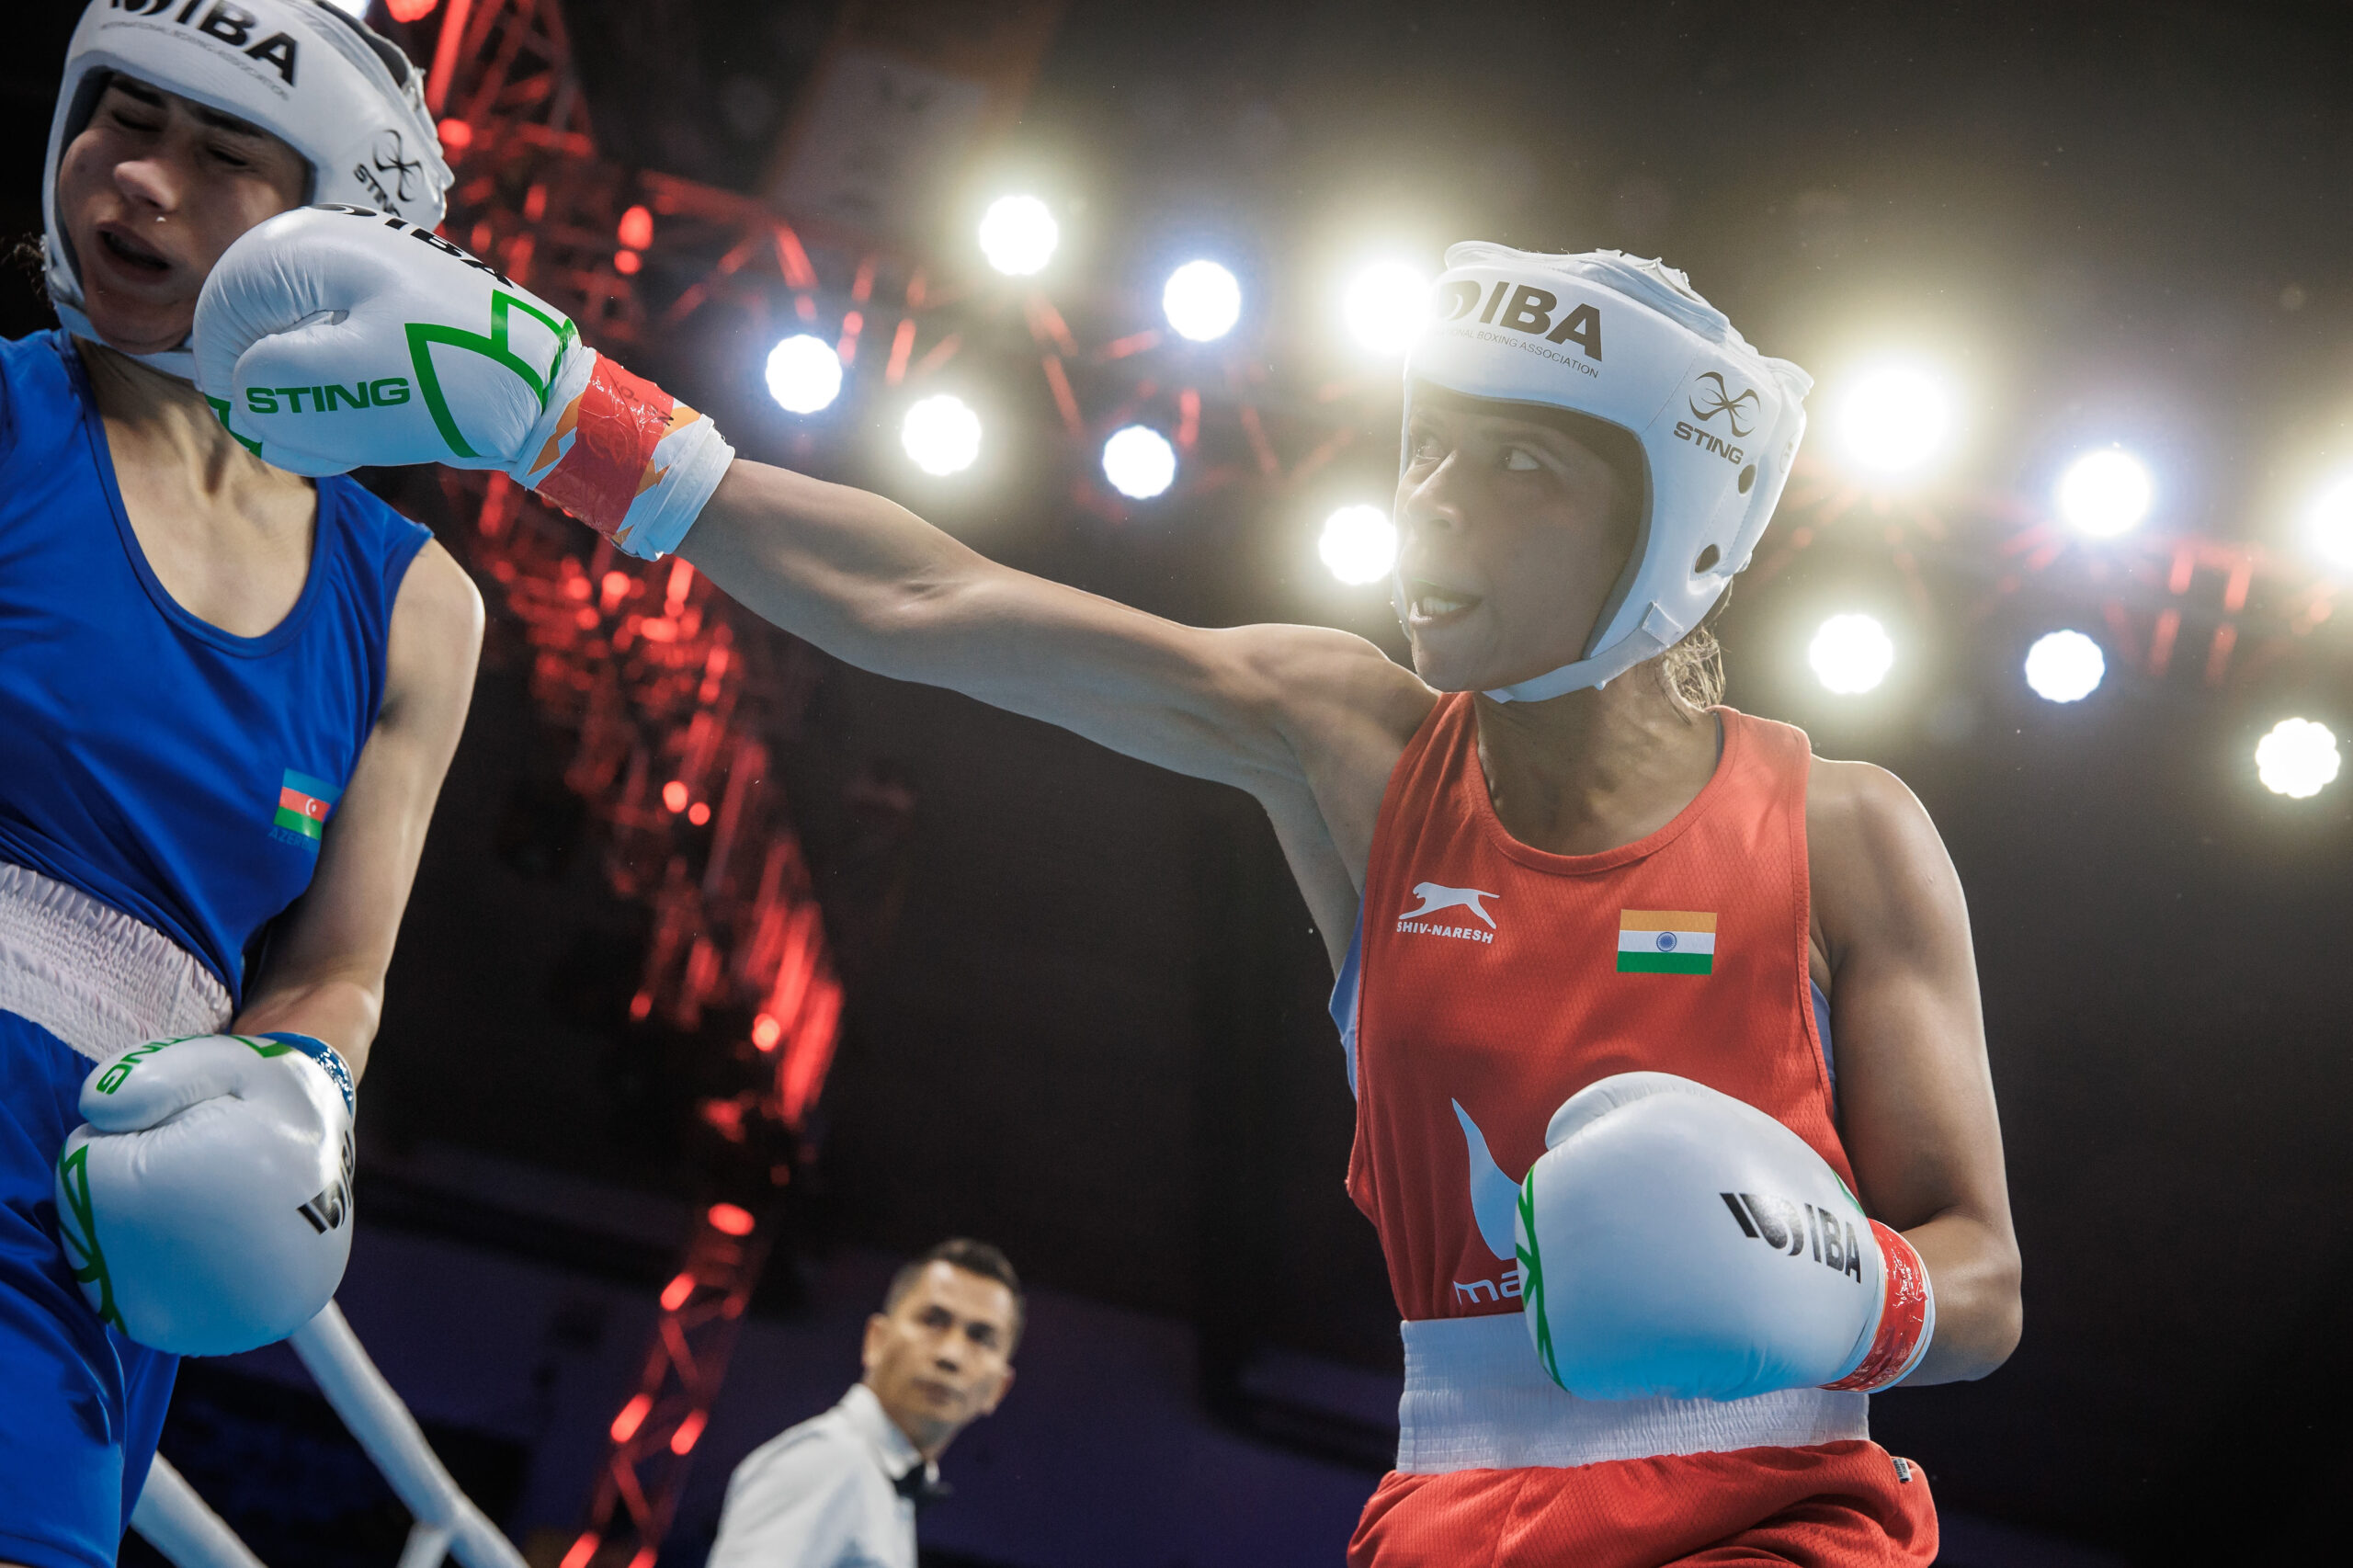 Nikhat Zareen shines in the ring on the first day of IBA Women’s World